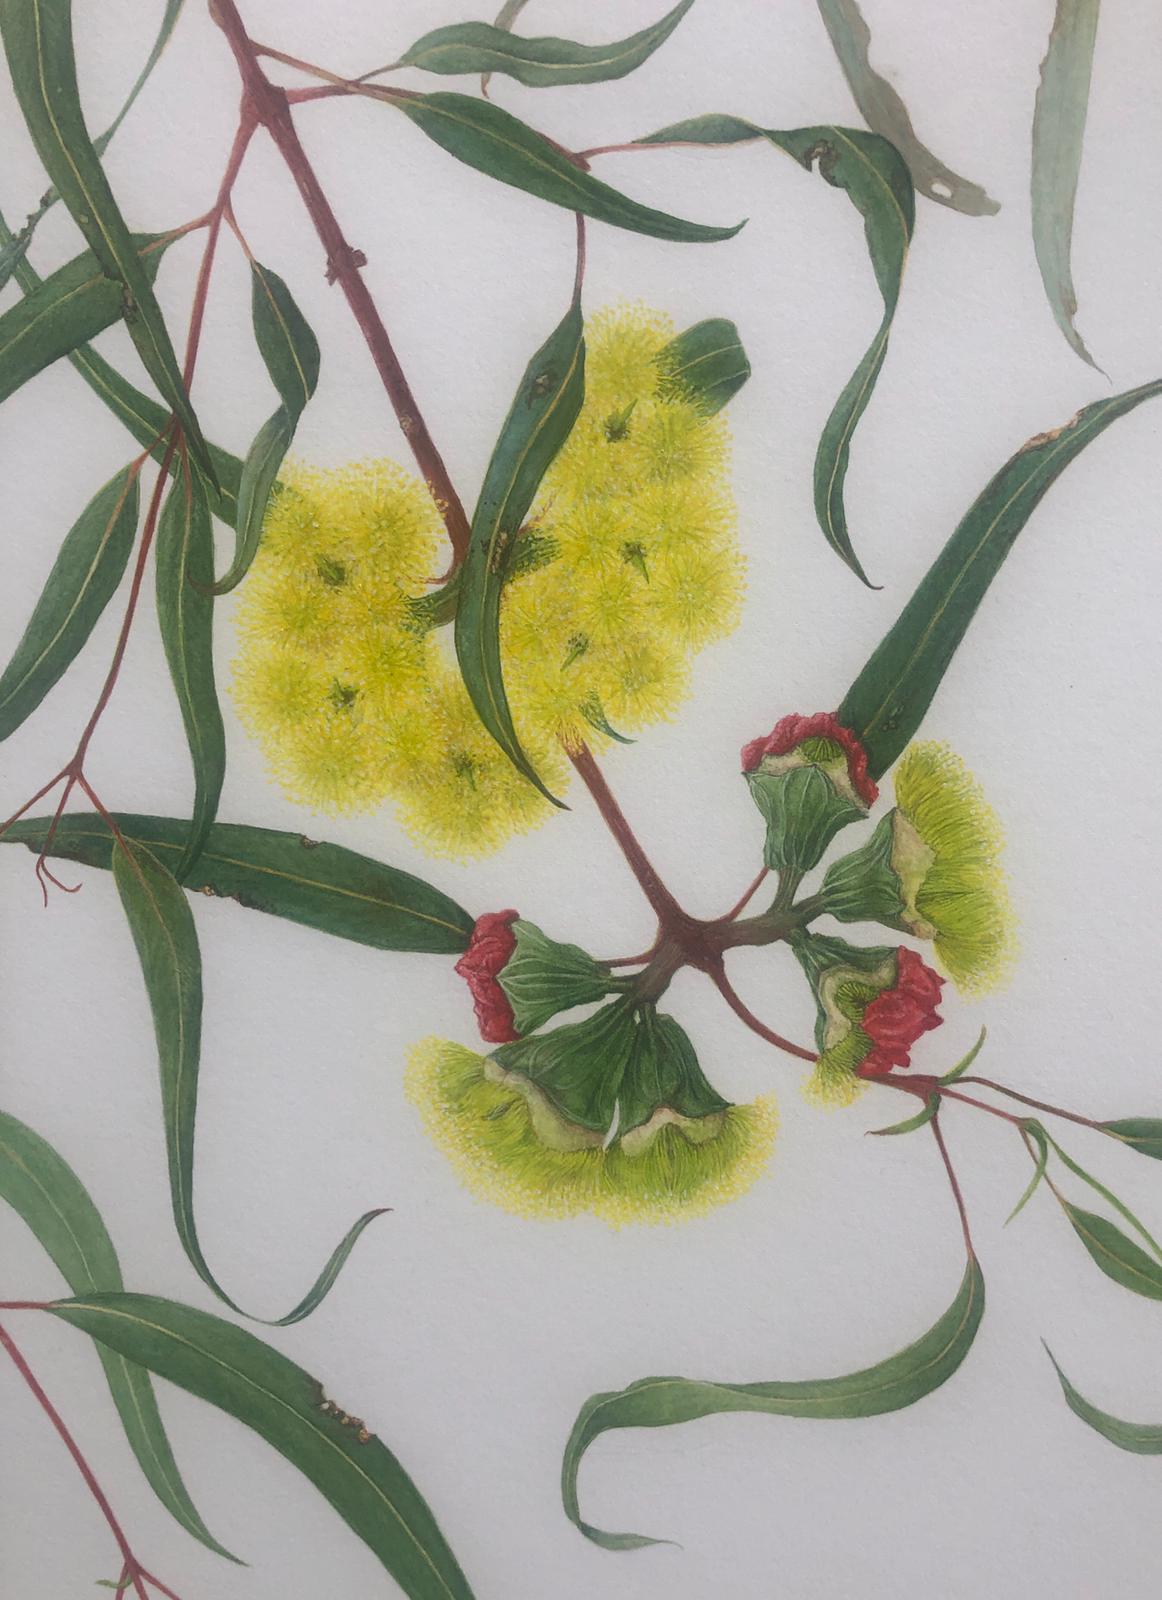 Painting of eucalyptus tree branch with yellow flowers.